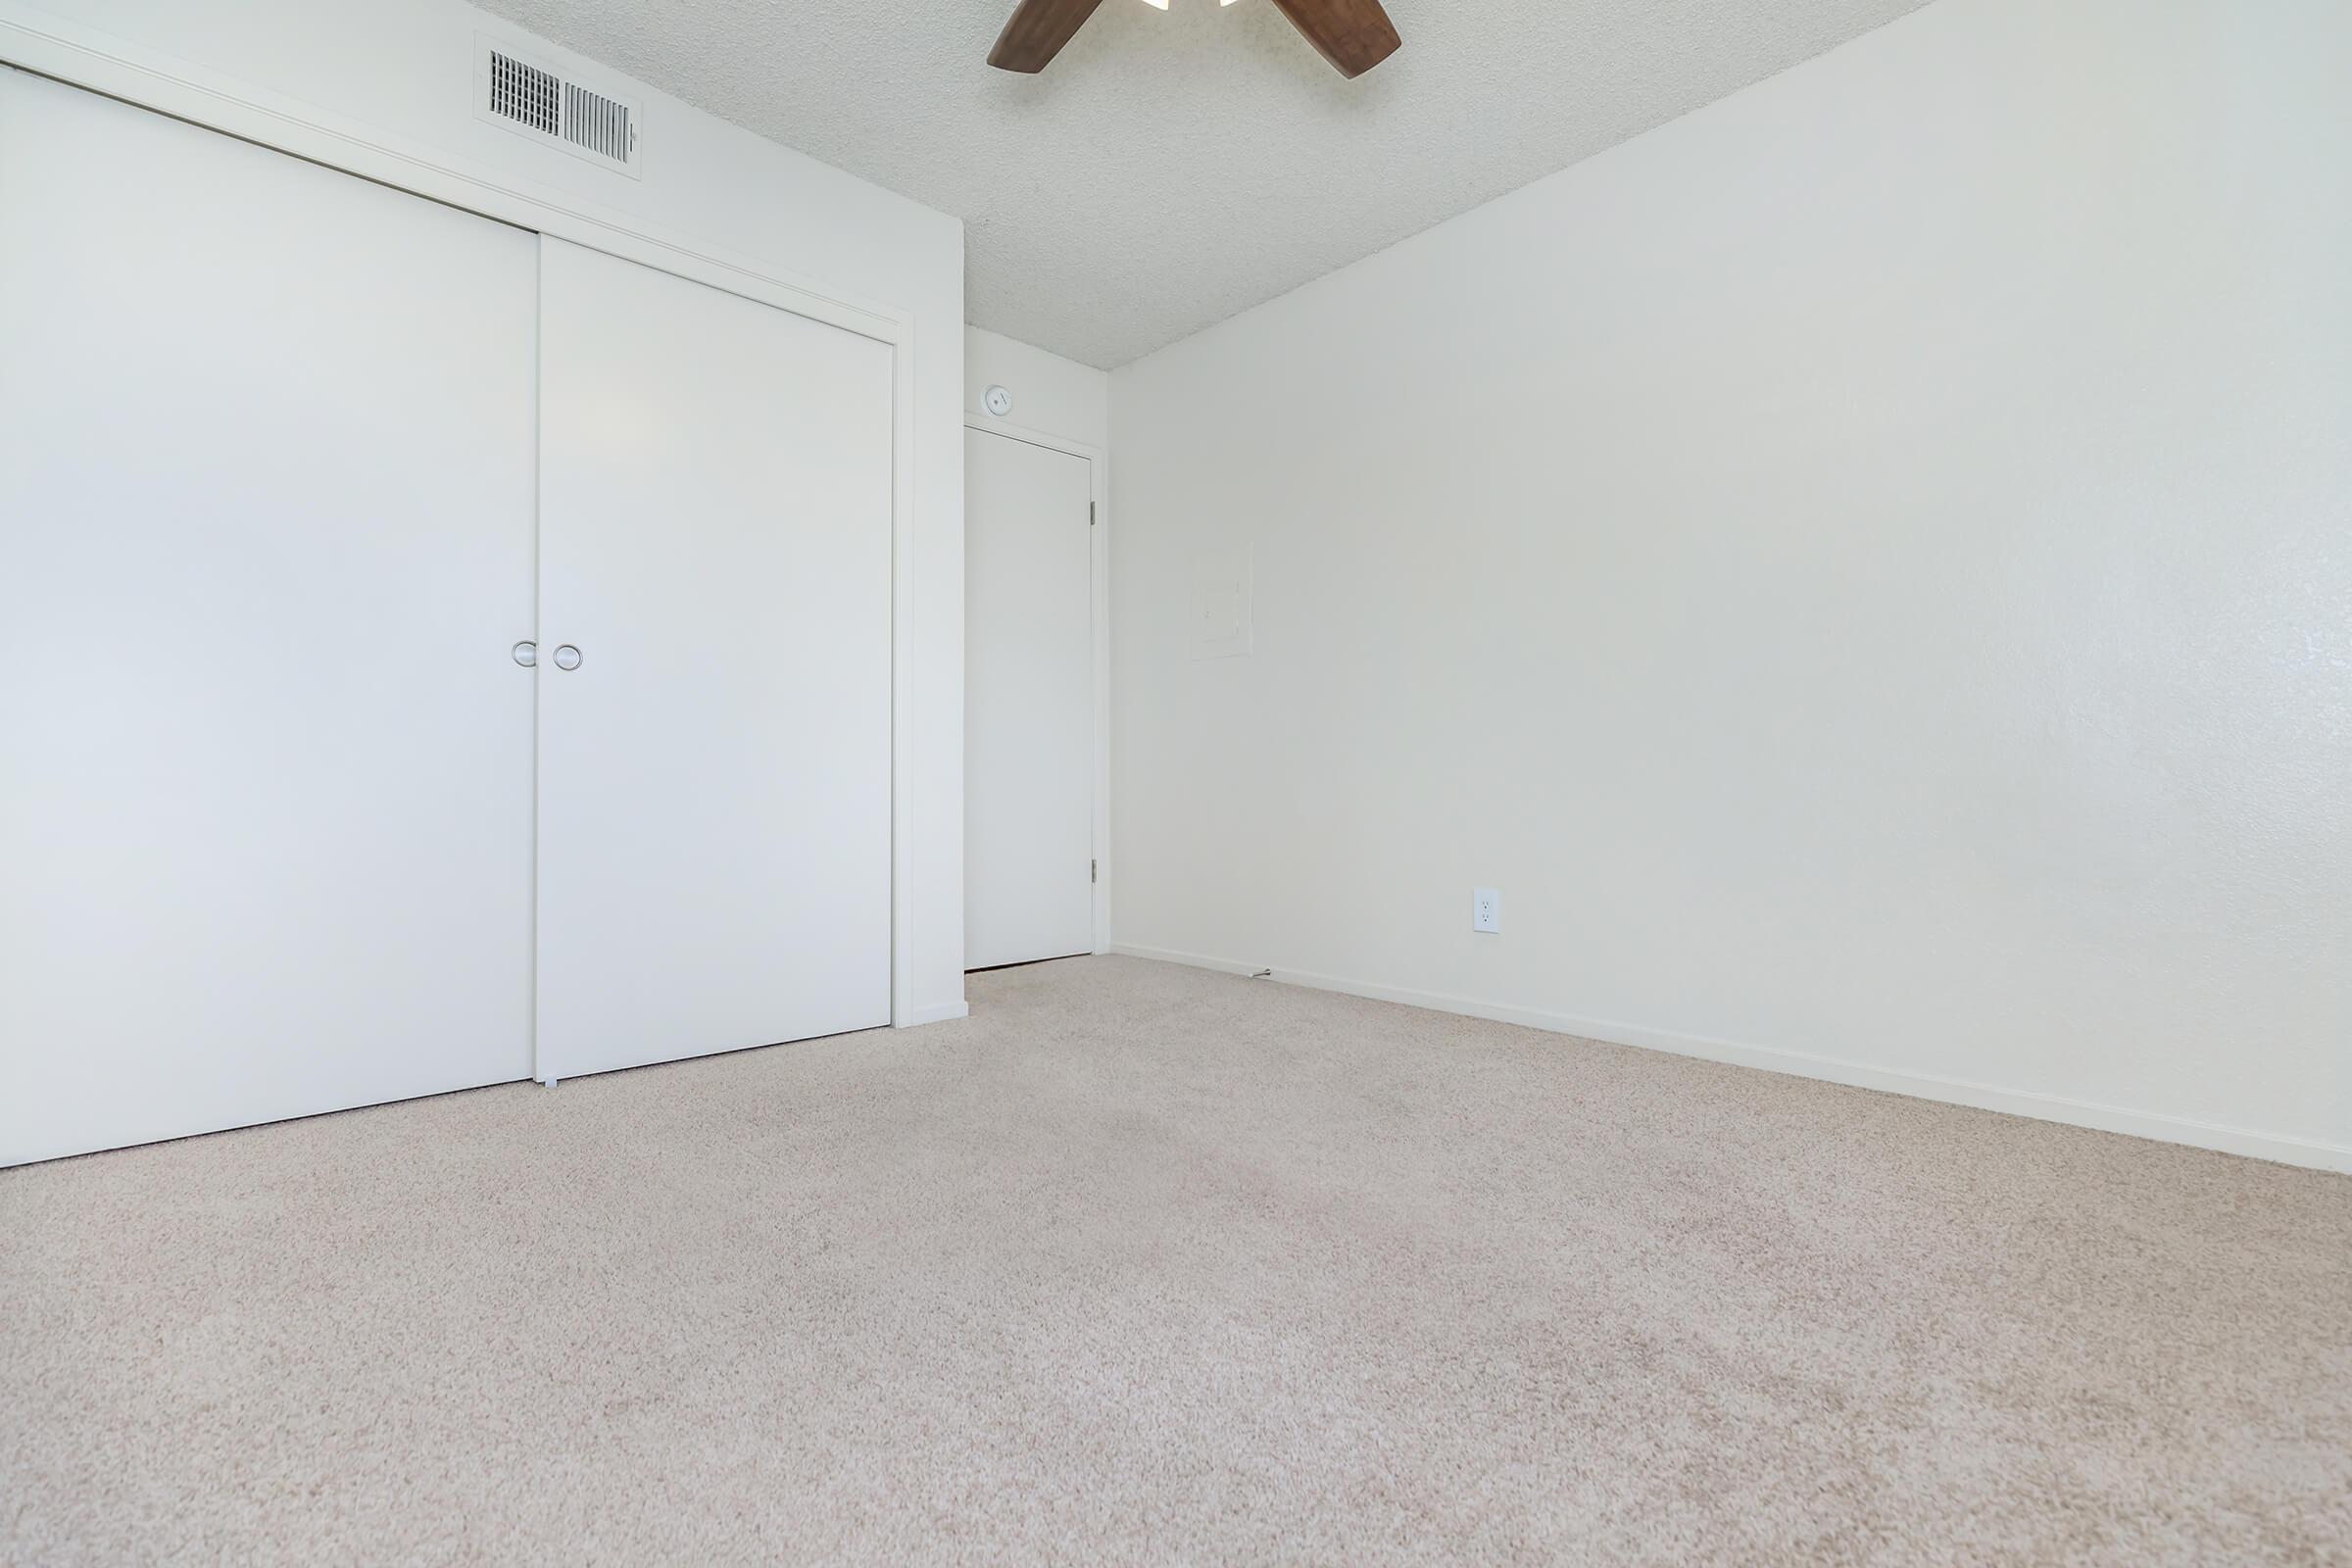 CARPETED FLOORS IN SELECT APARTMENTS FOR RENT